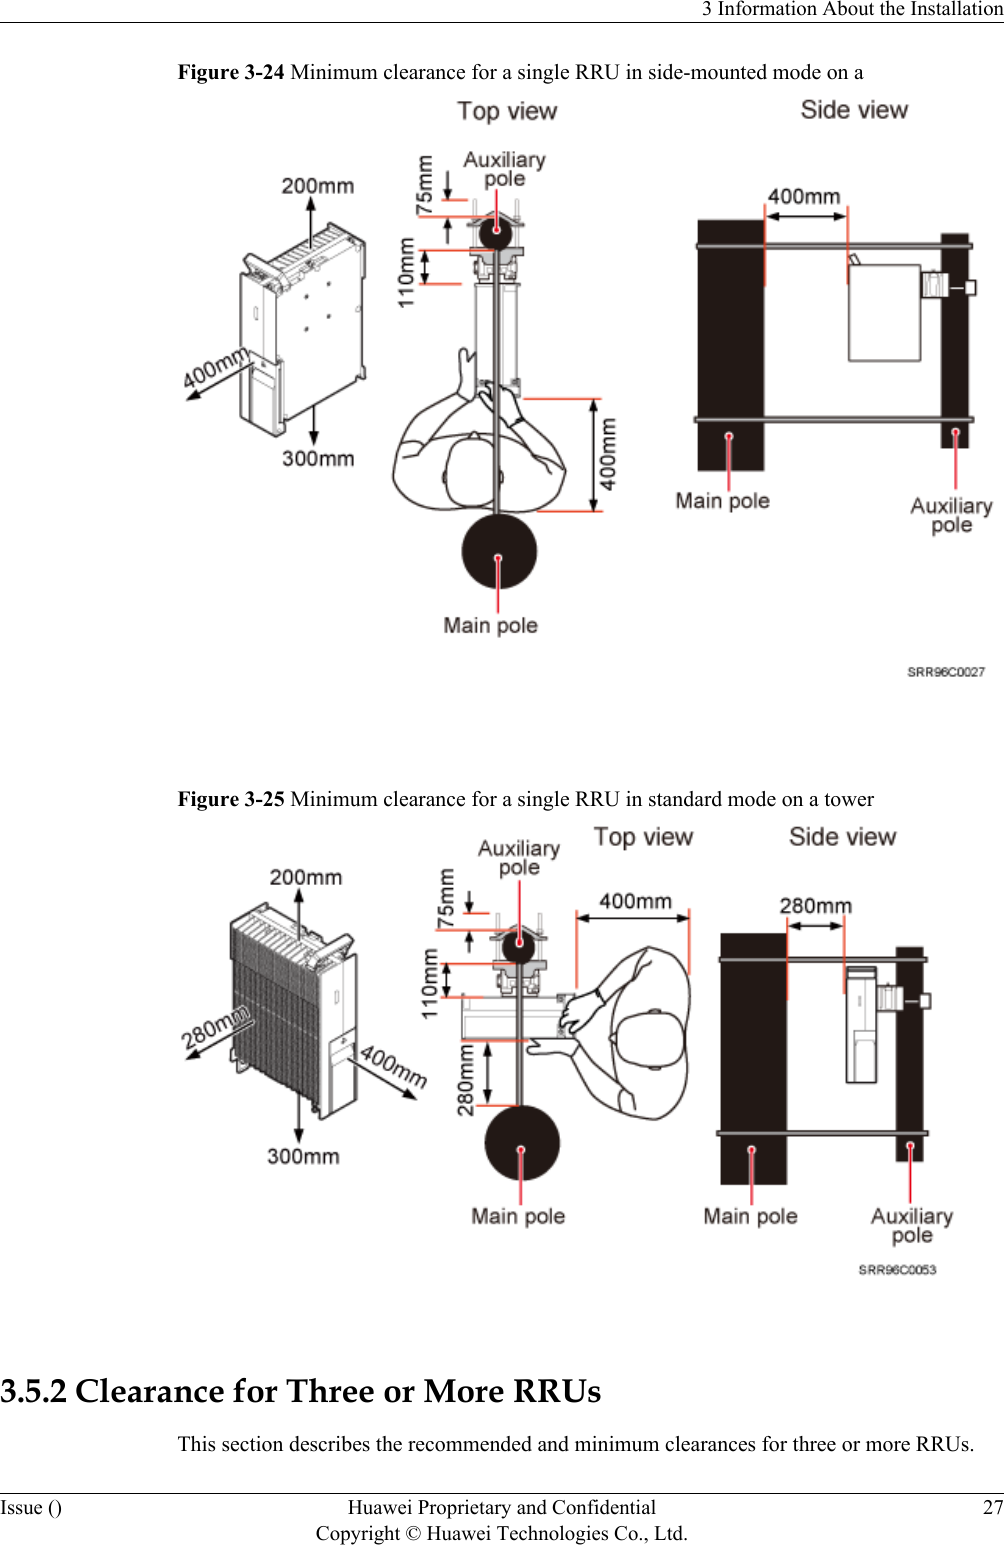 Figure 3-24 Minimum clearance for a single RRU in side-mounted mode on a Figure 3-25 Minimum clearance for a single RRU in standard mode on a tower 3.5.2 Clearance for Three or More RRUsThis section describes the recommended and minimum clearances for three or more RRUs.3 Information About the InstallationIssue () Huawei Proprietary and ConfidentialCopyright © Huawei Technologies Co., Ltd.27